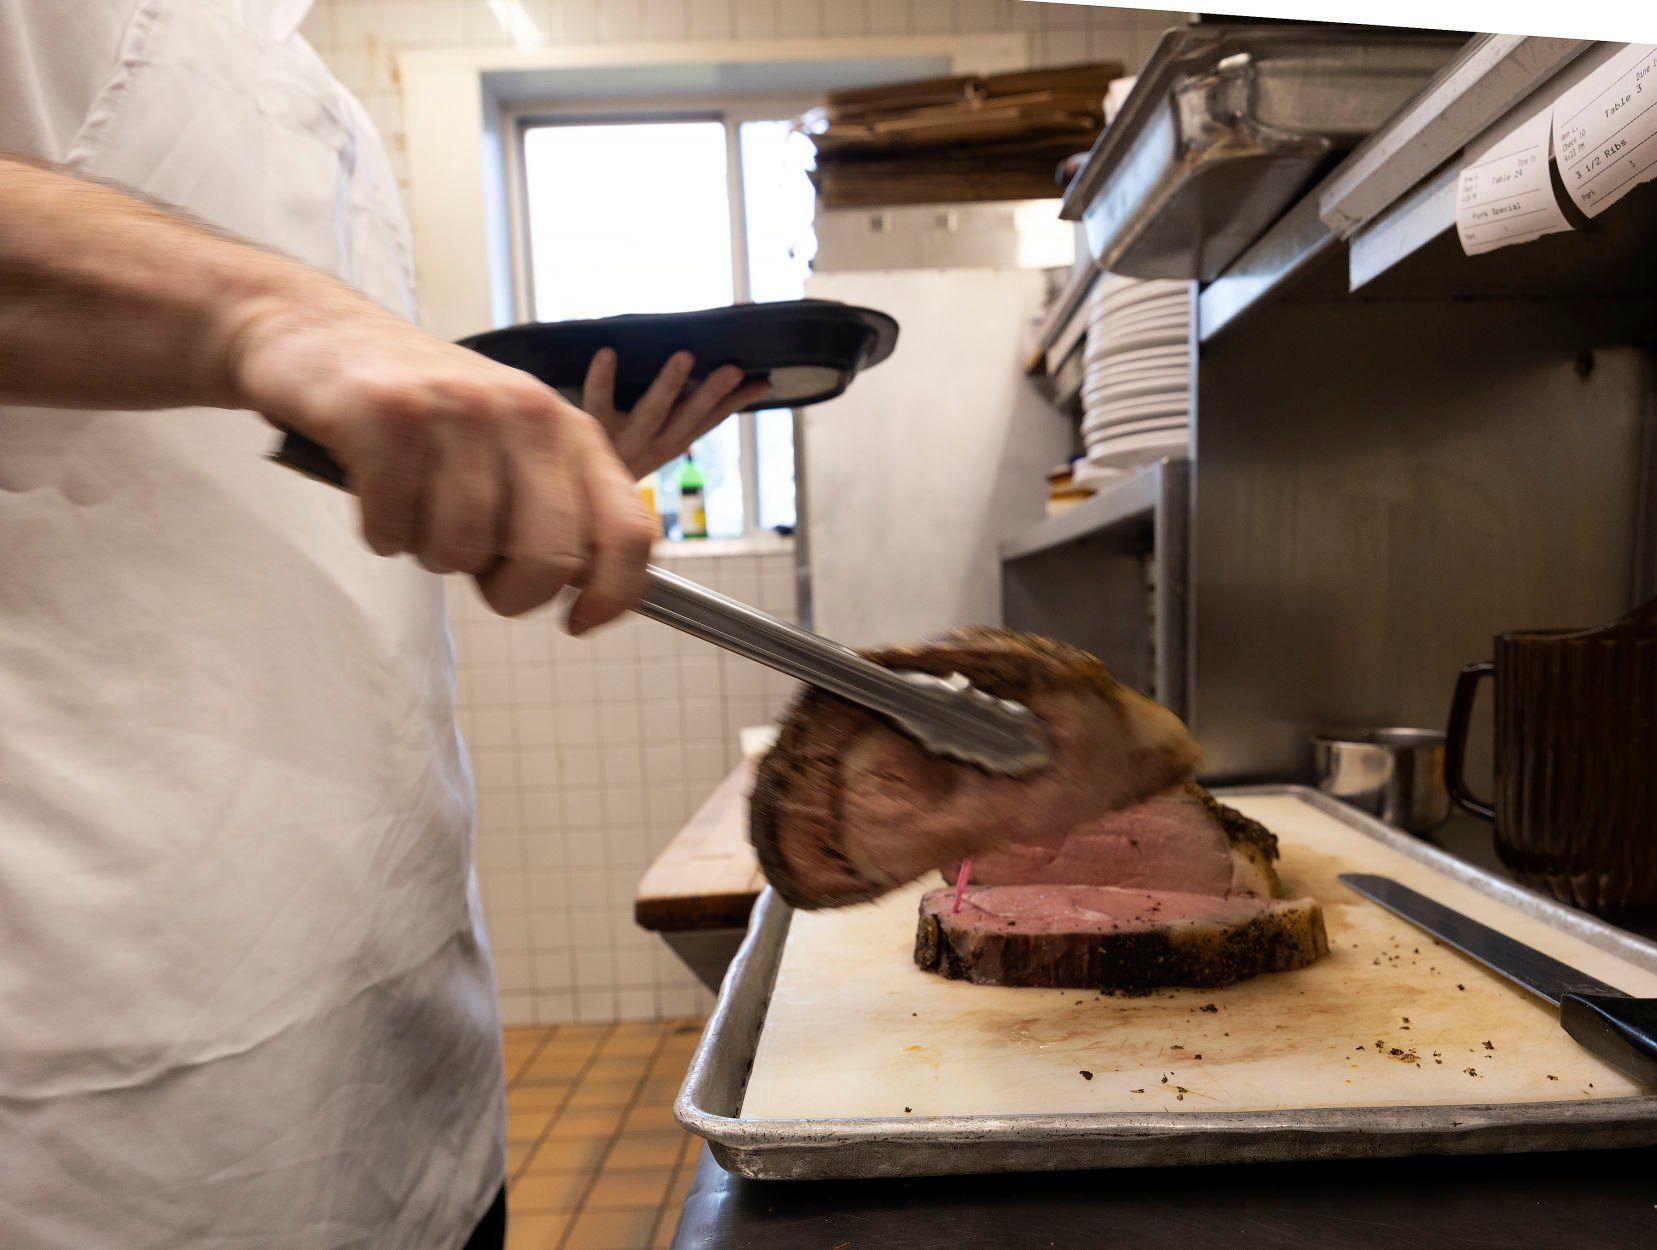 Prime rib being plated in the kitchen.    PHOTO CREDIT: Stephen Gassman